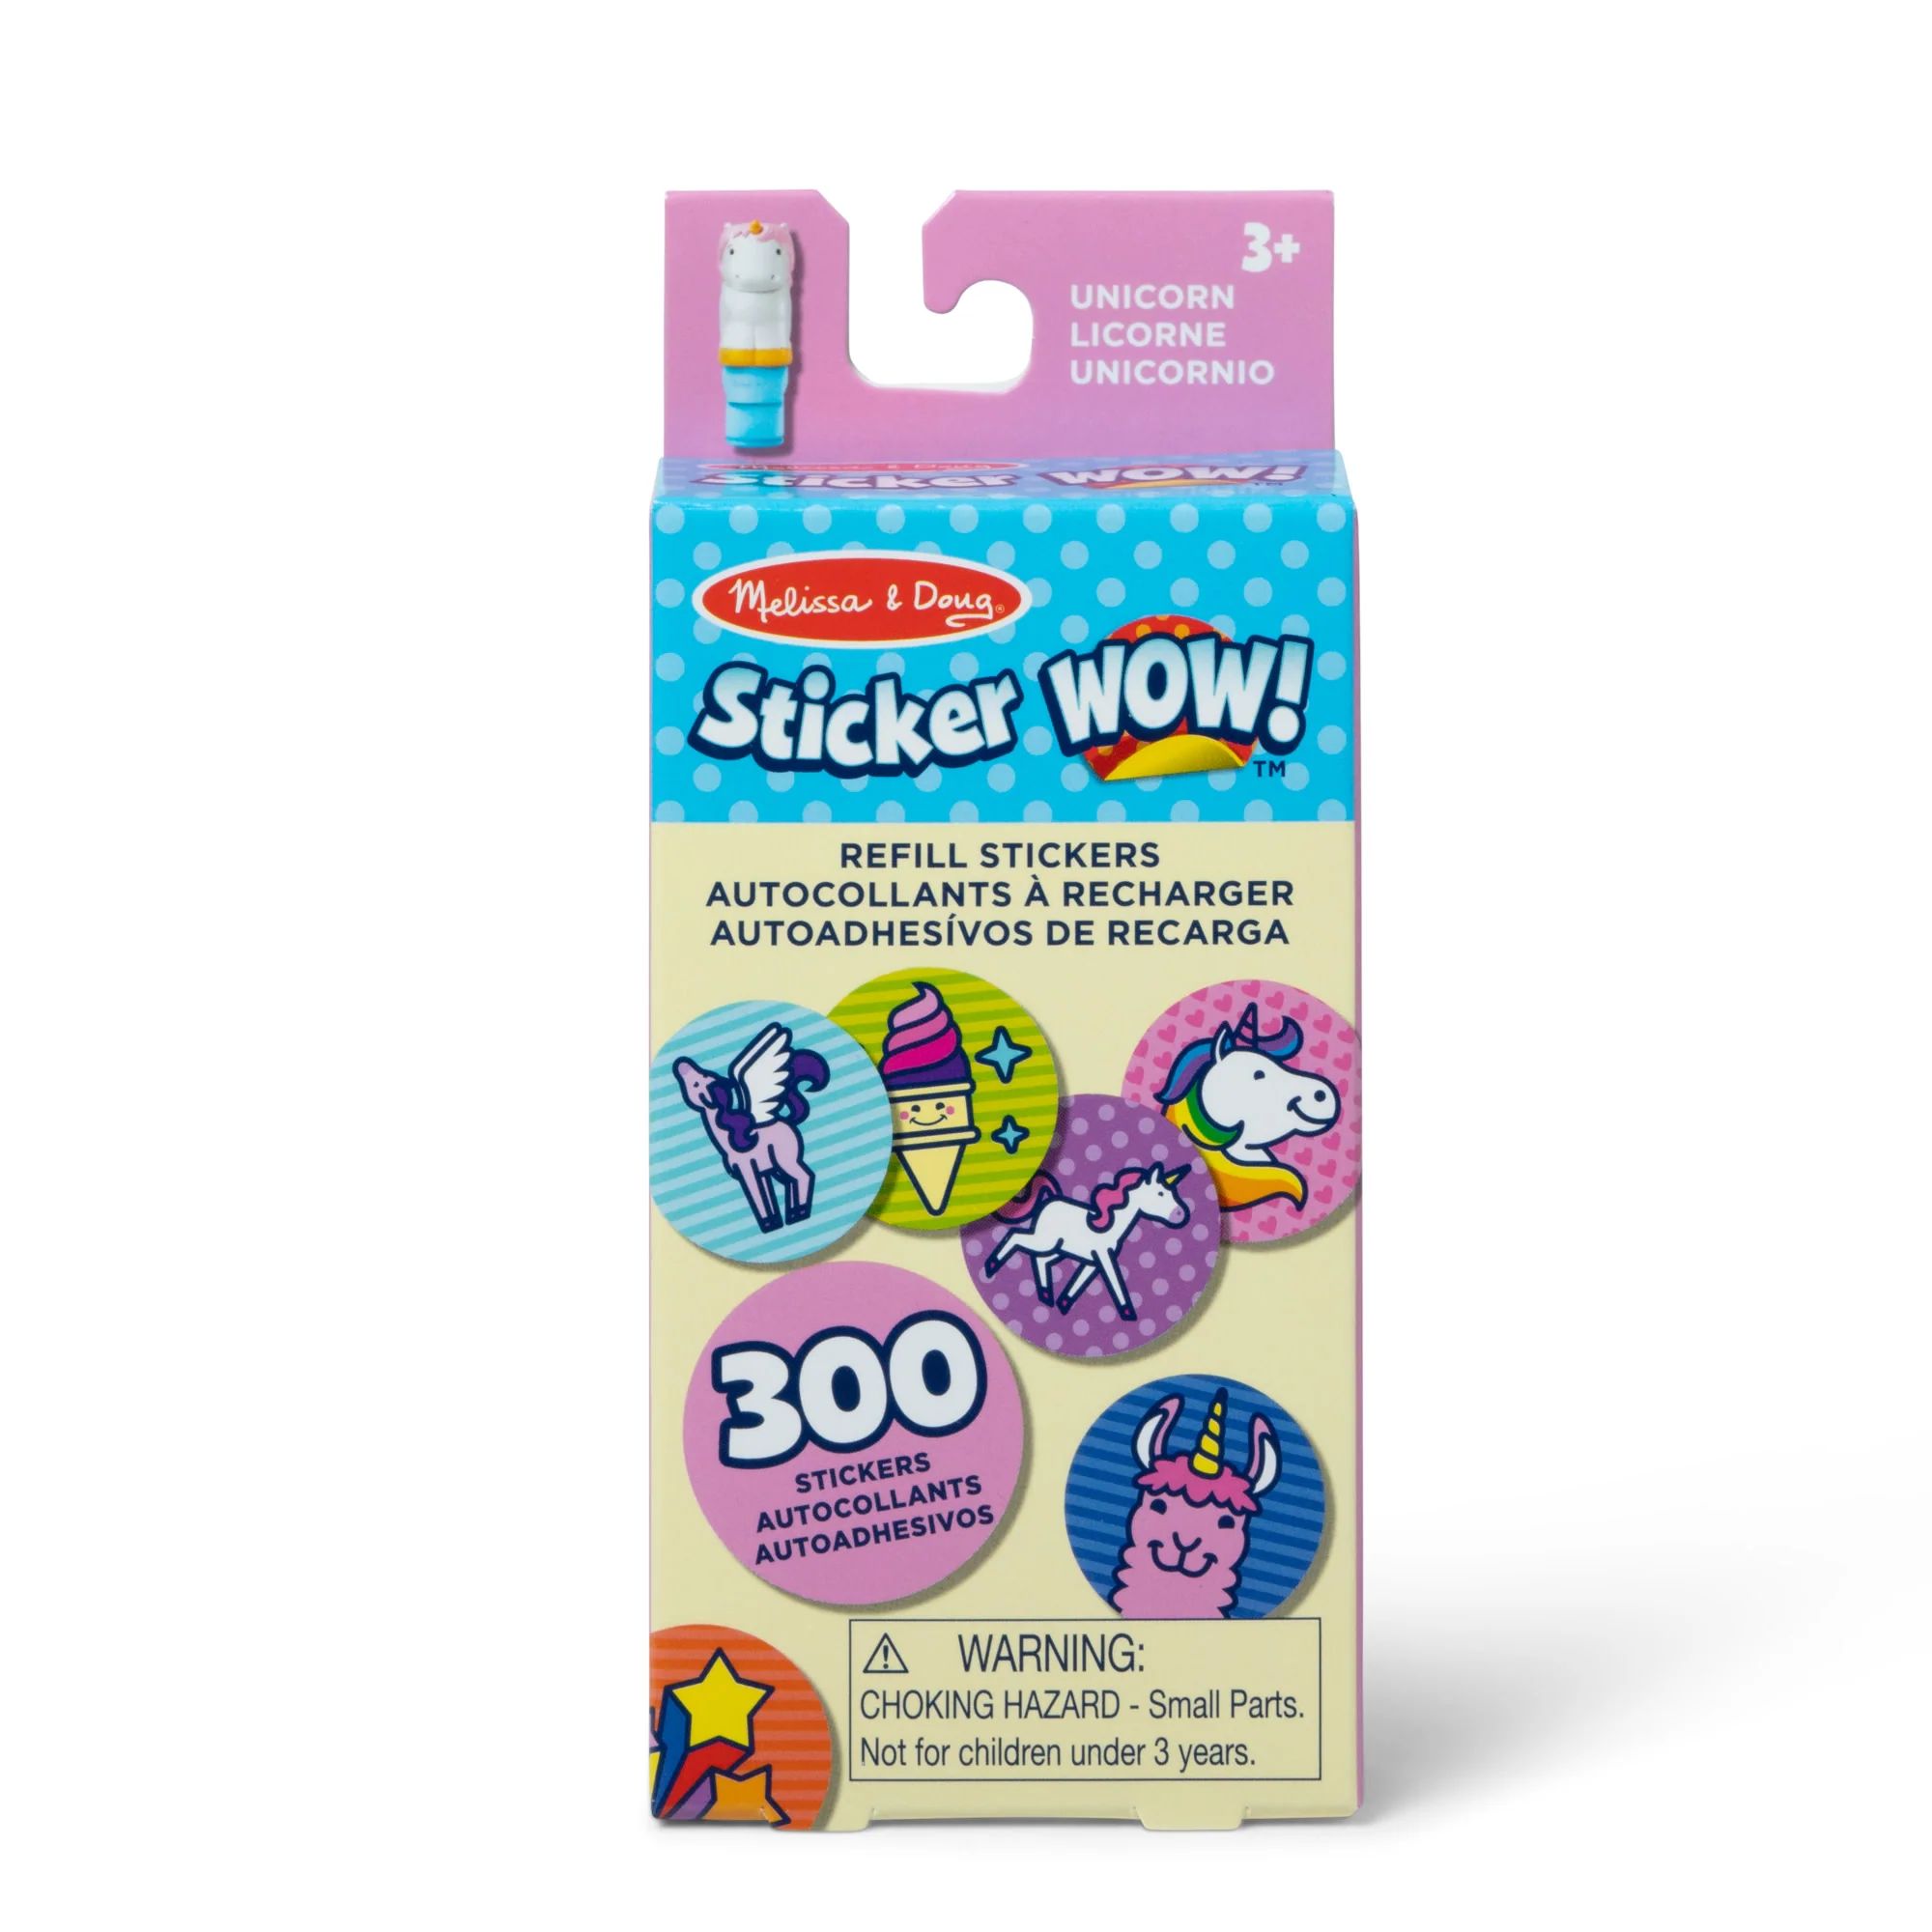 Sticker WOW!® Refill Stickers – Unicorn (Stickers Only, 300+) | Melissa and Doug